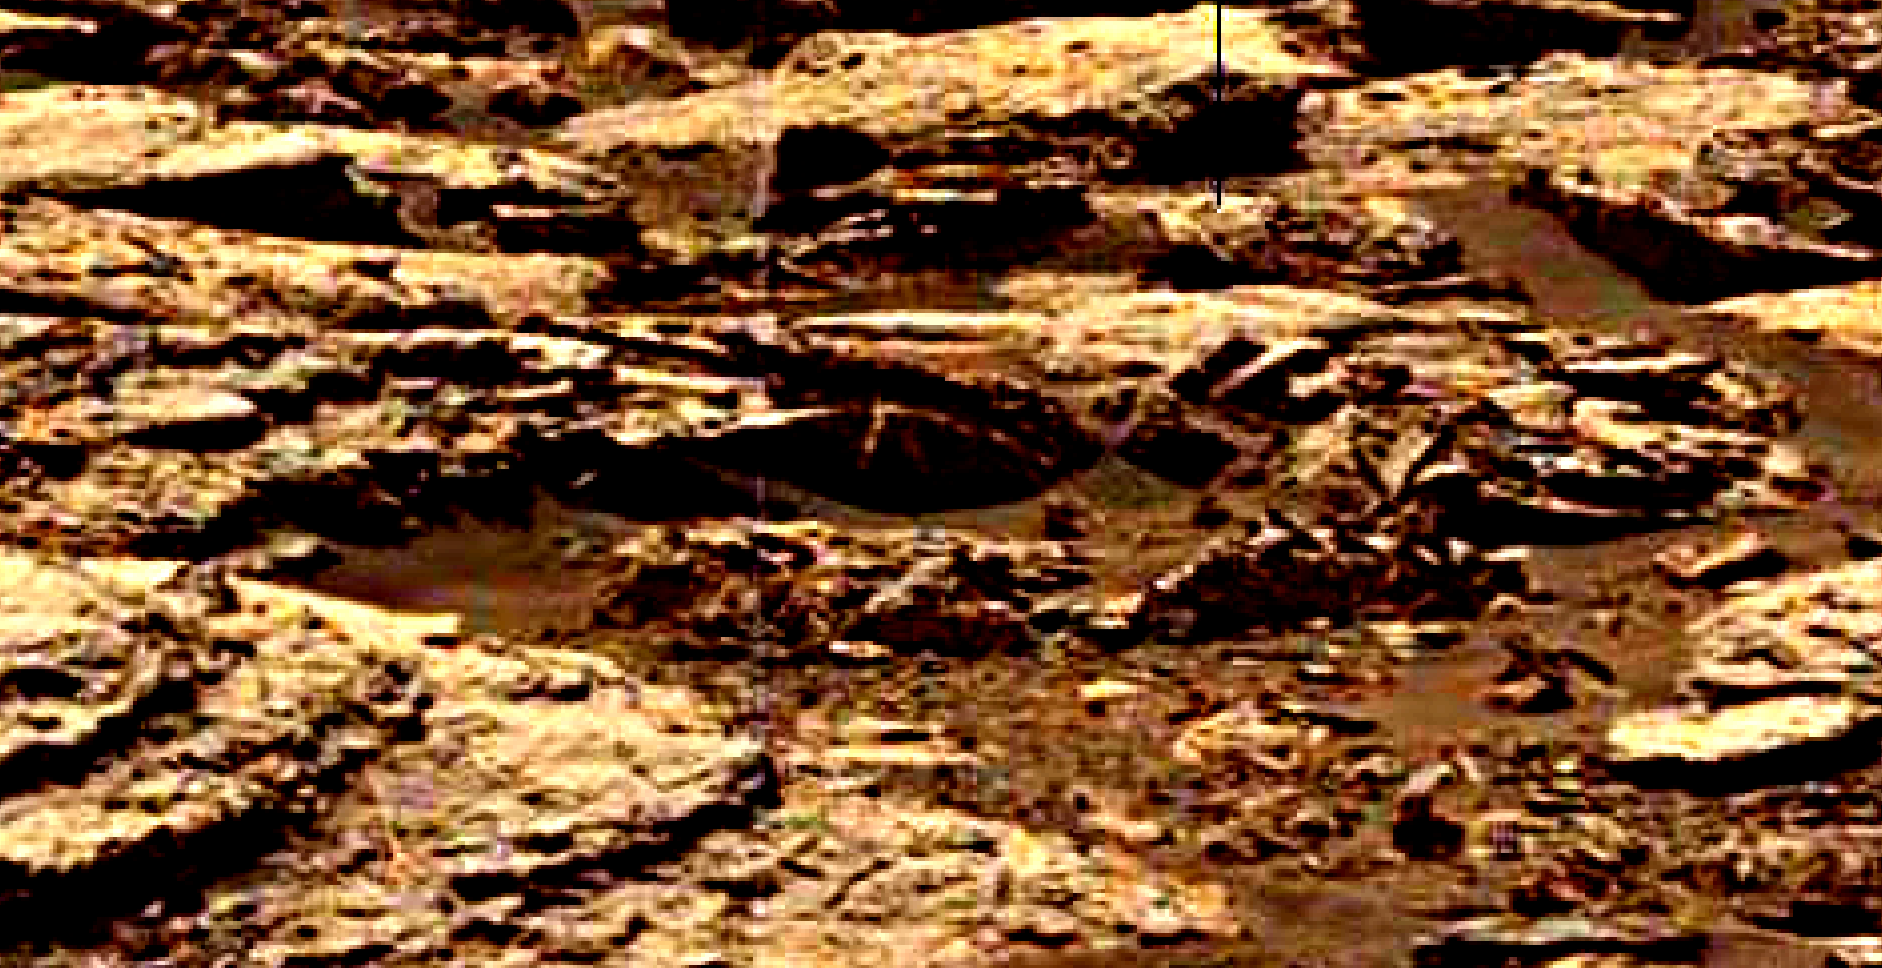 mars-sol-1485-anomaly-artifacts-18b-was-life-on-mars